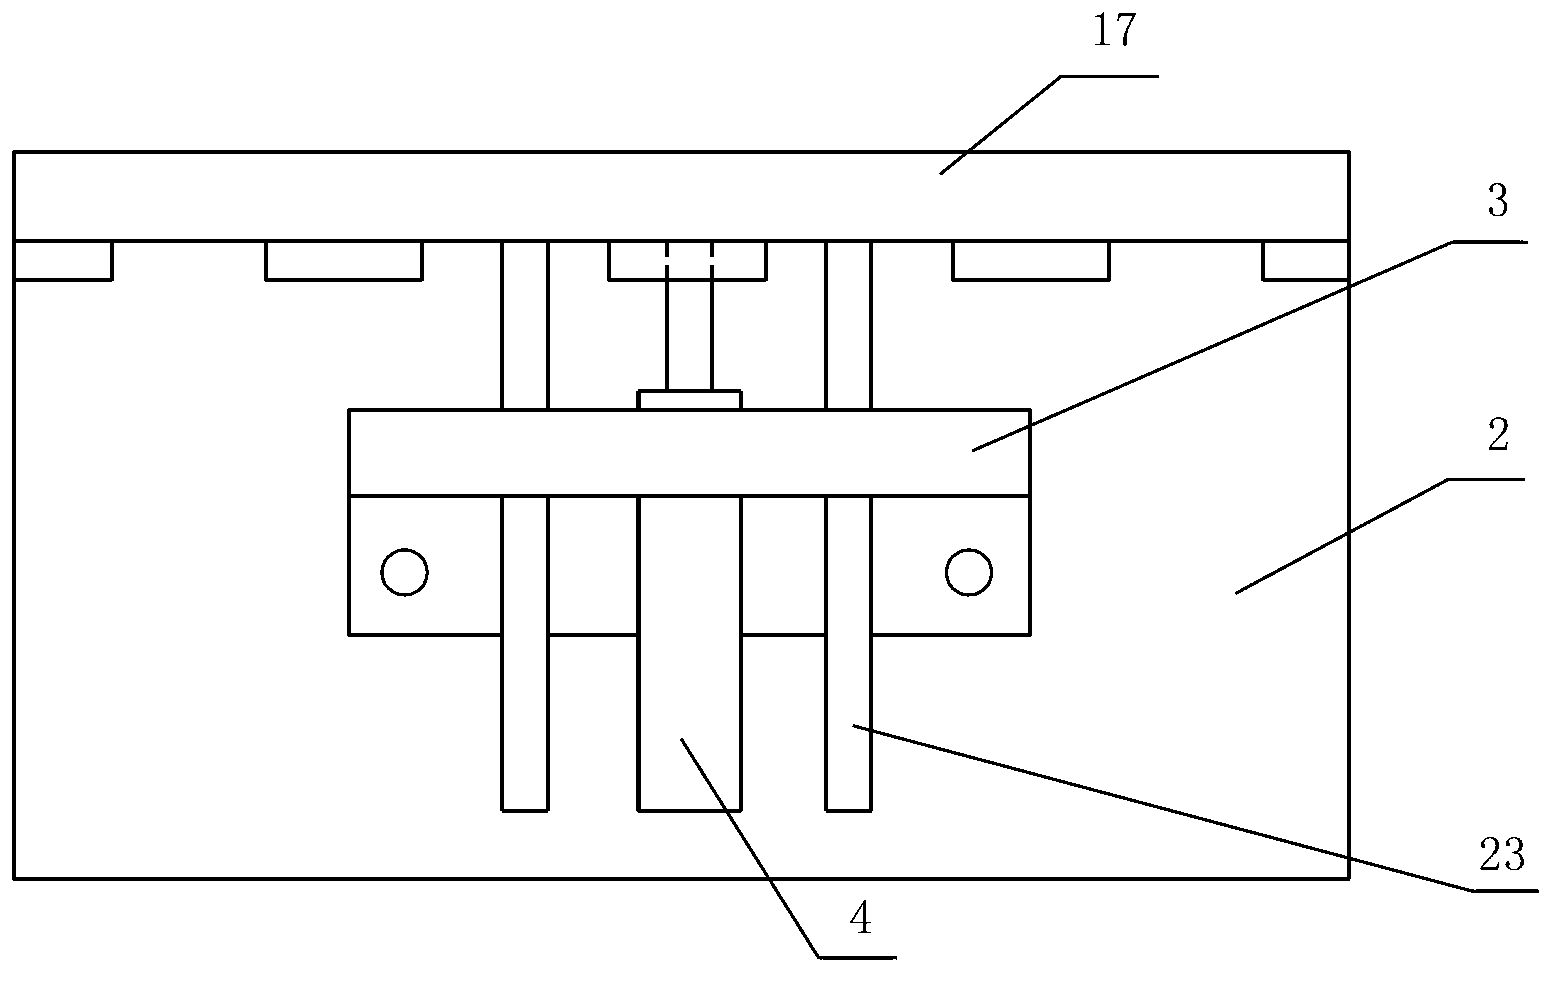 Mechanism for shaping and boxing glove